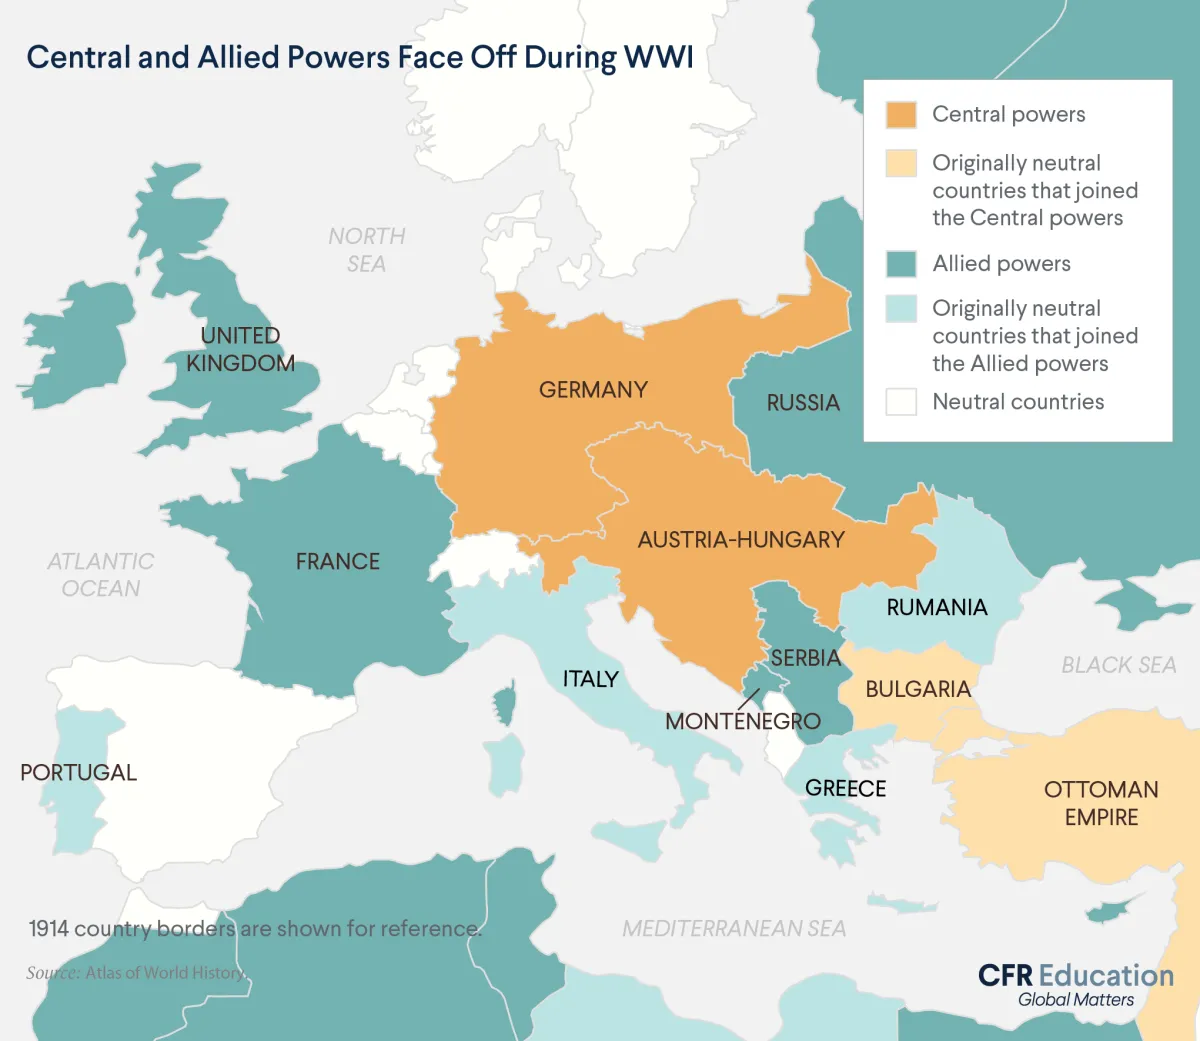 Map of the Allies and Central powers  in Europe that faced off during WWI. For more info contact us at cfr_education@cfr.org.